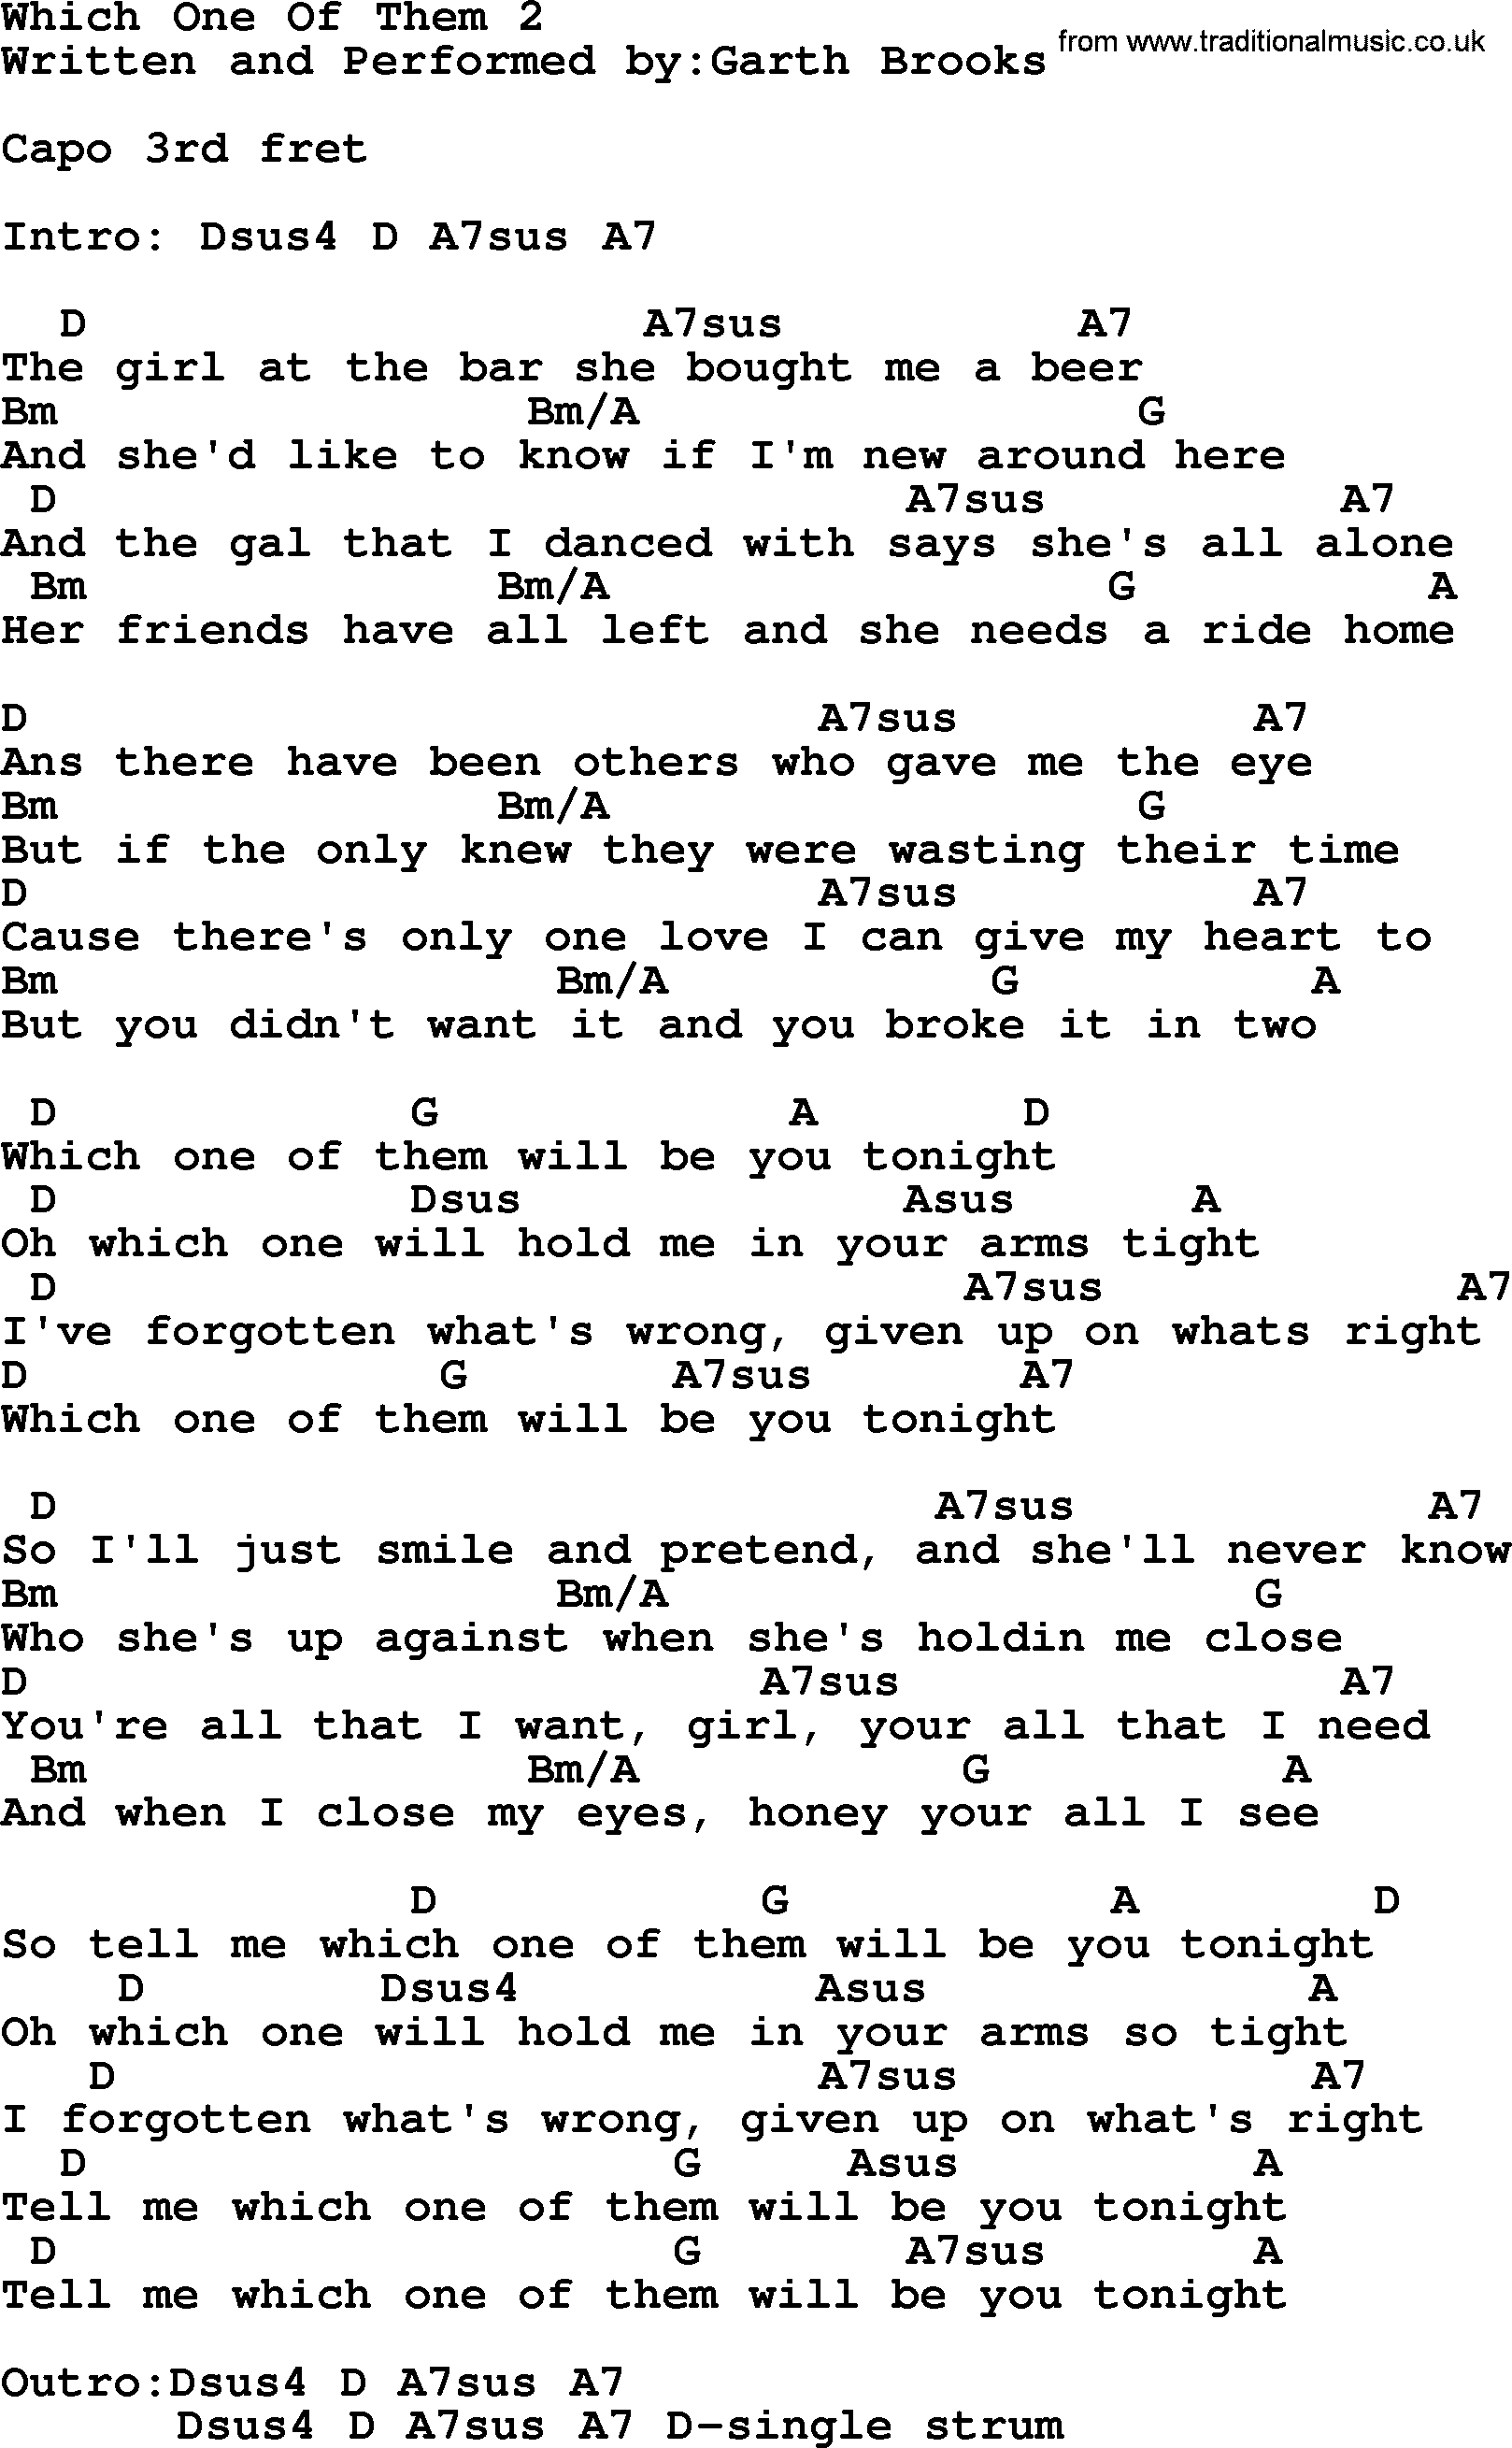 Garth Brooks song: Which One Of Them 2, lyrics and chords